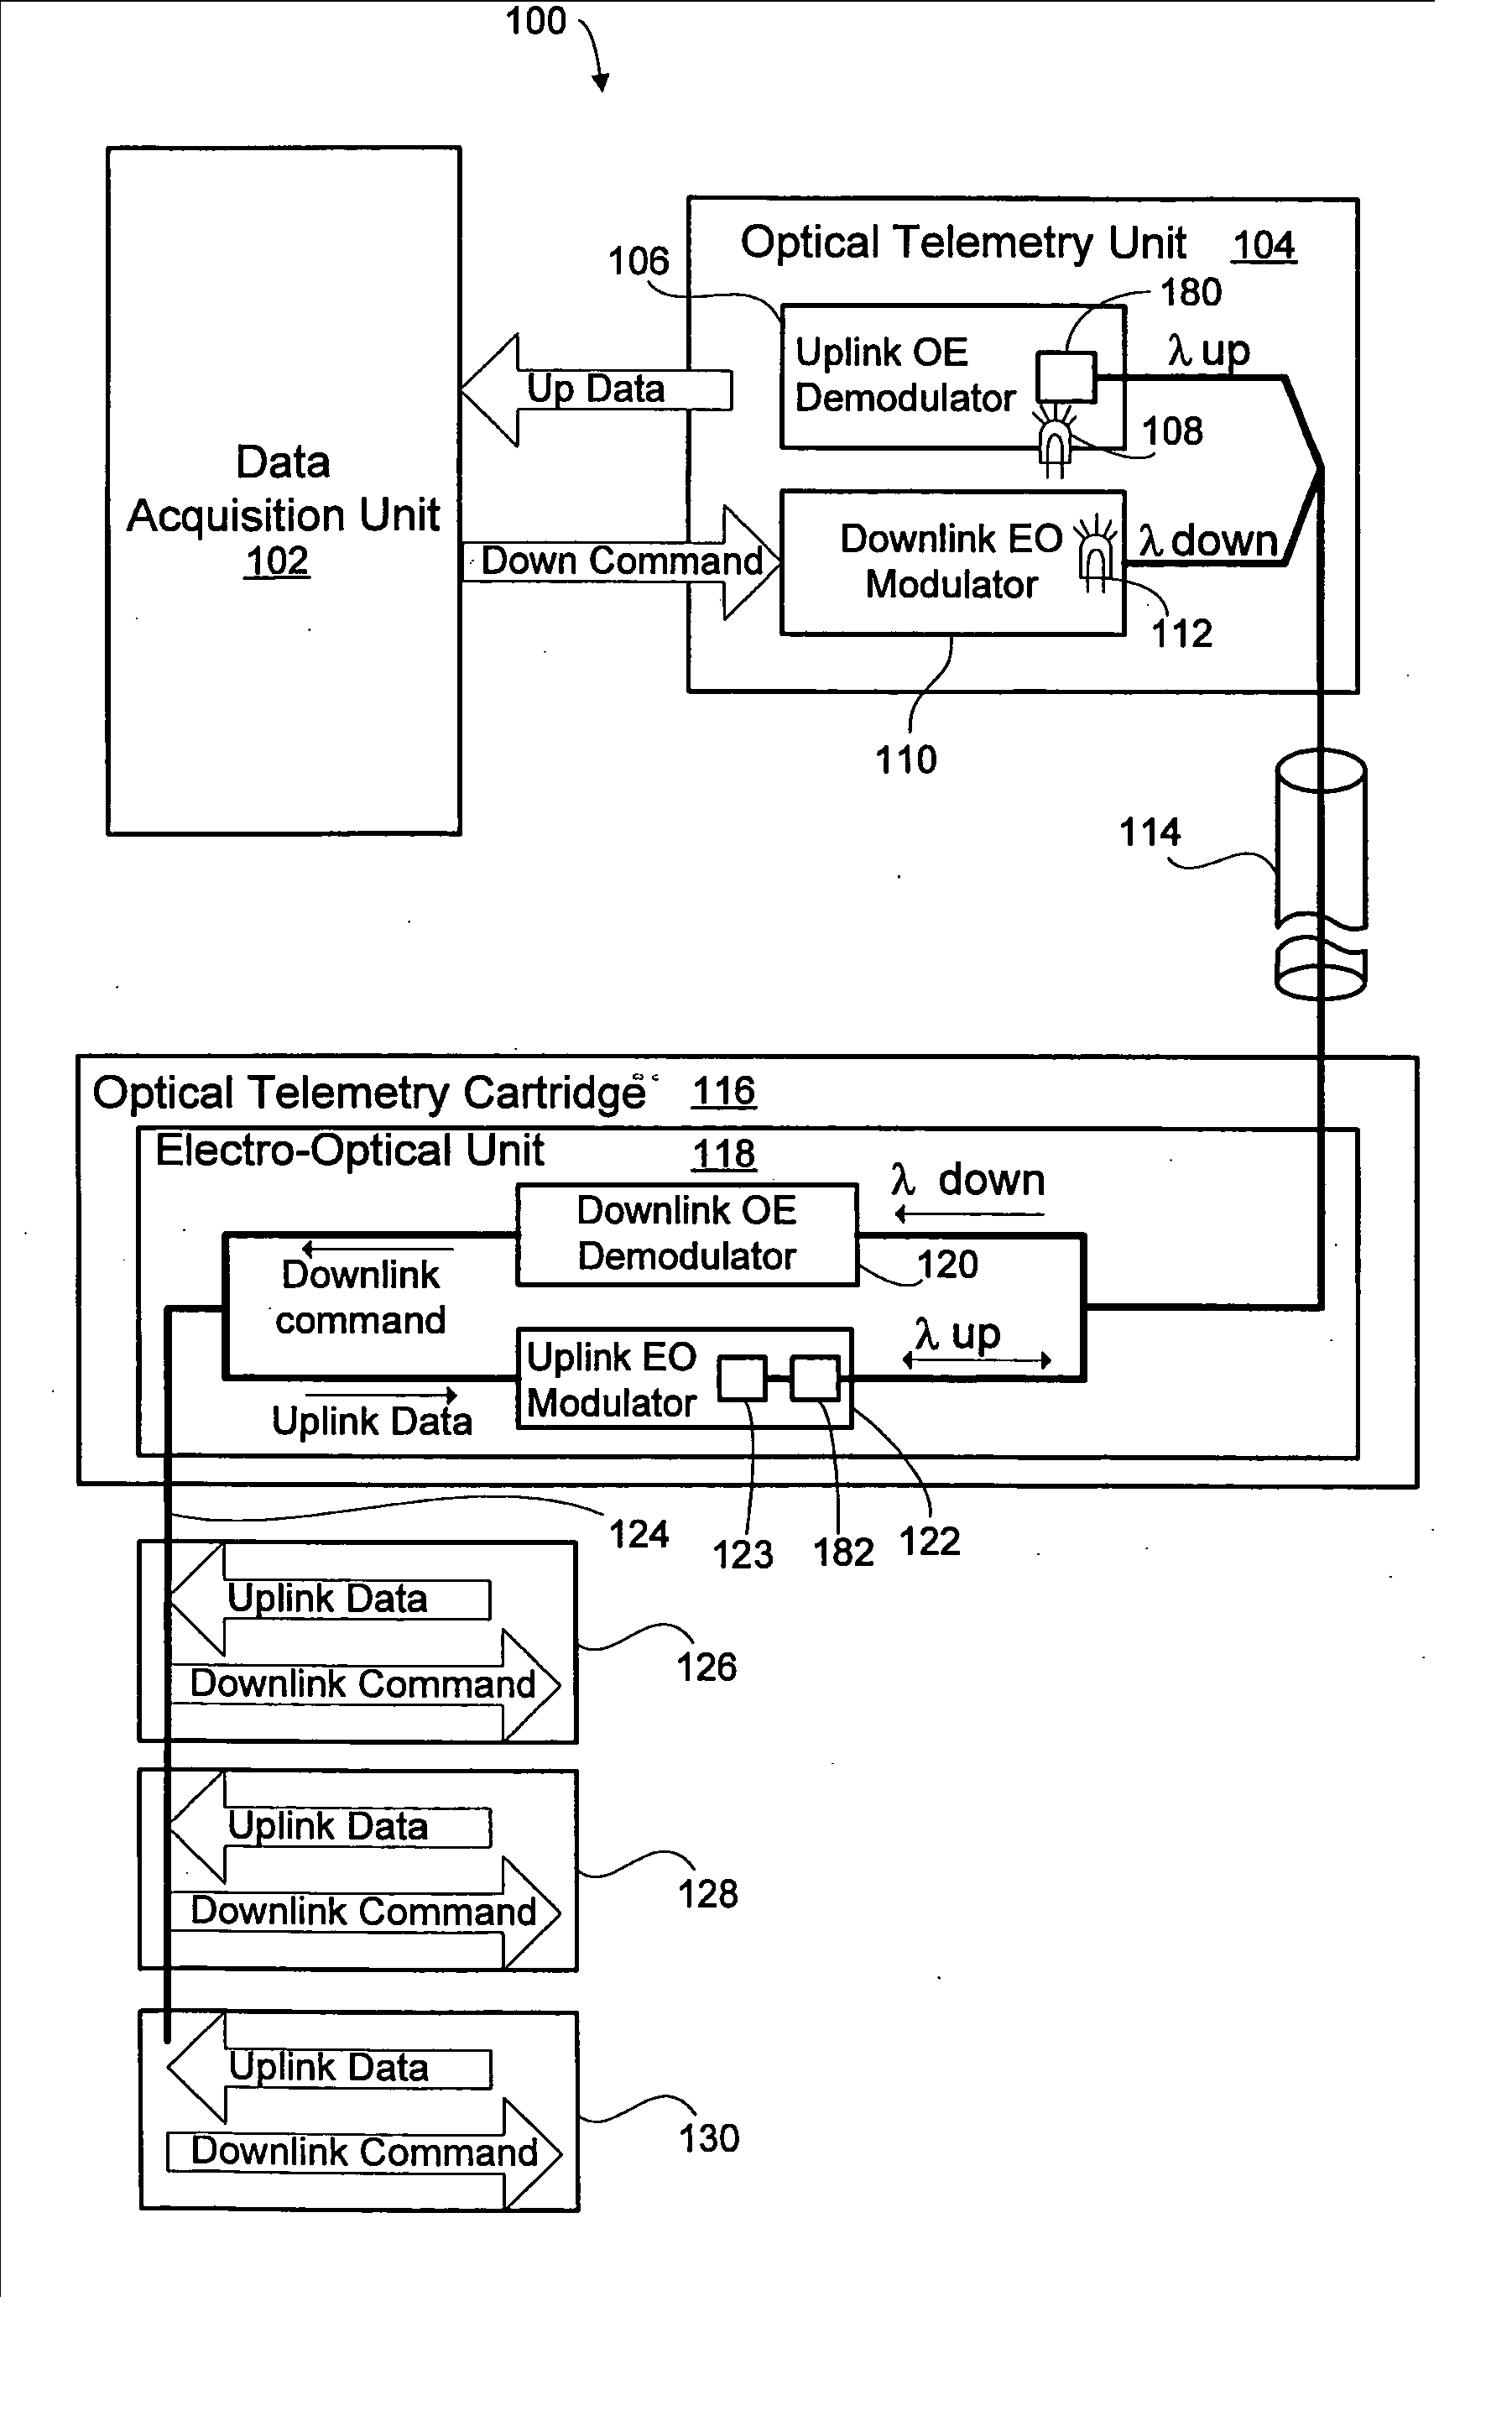 Methods and apparatus for electro-optical hybrid telemetry